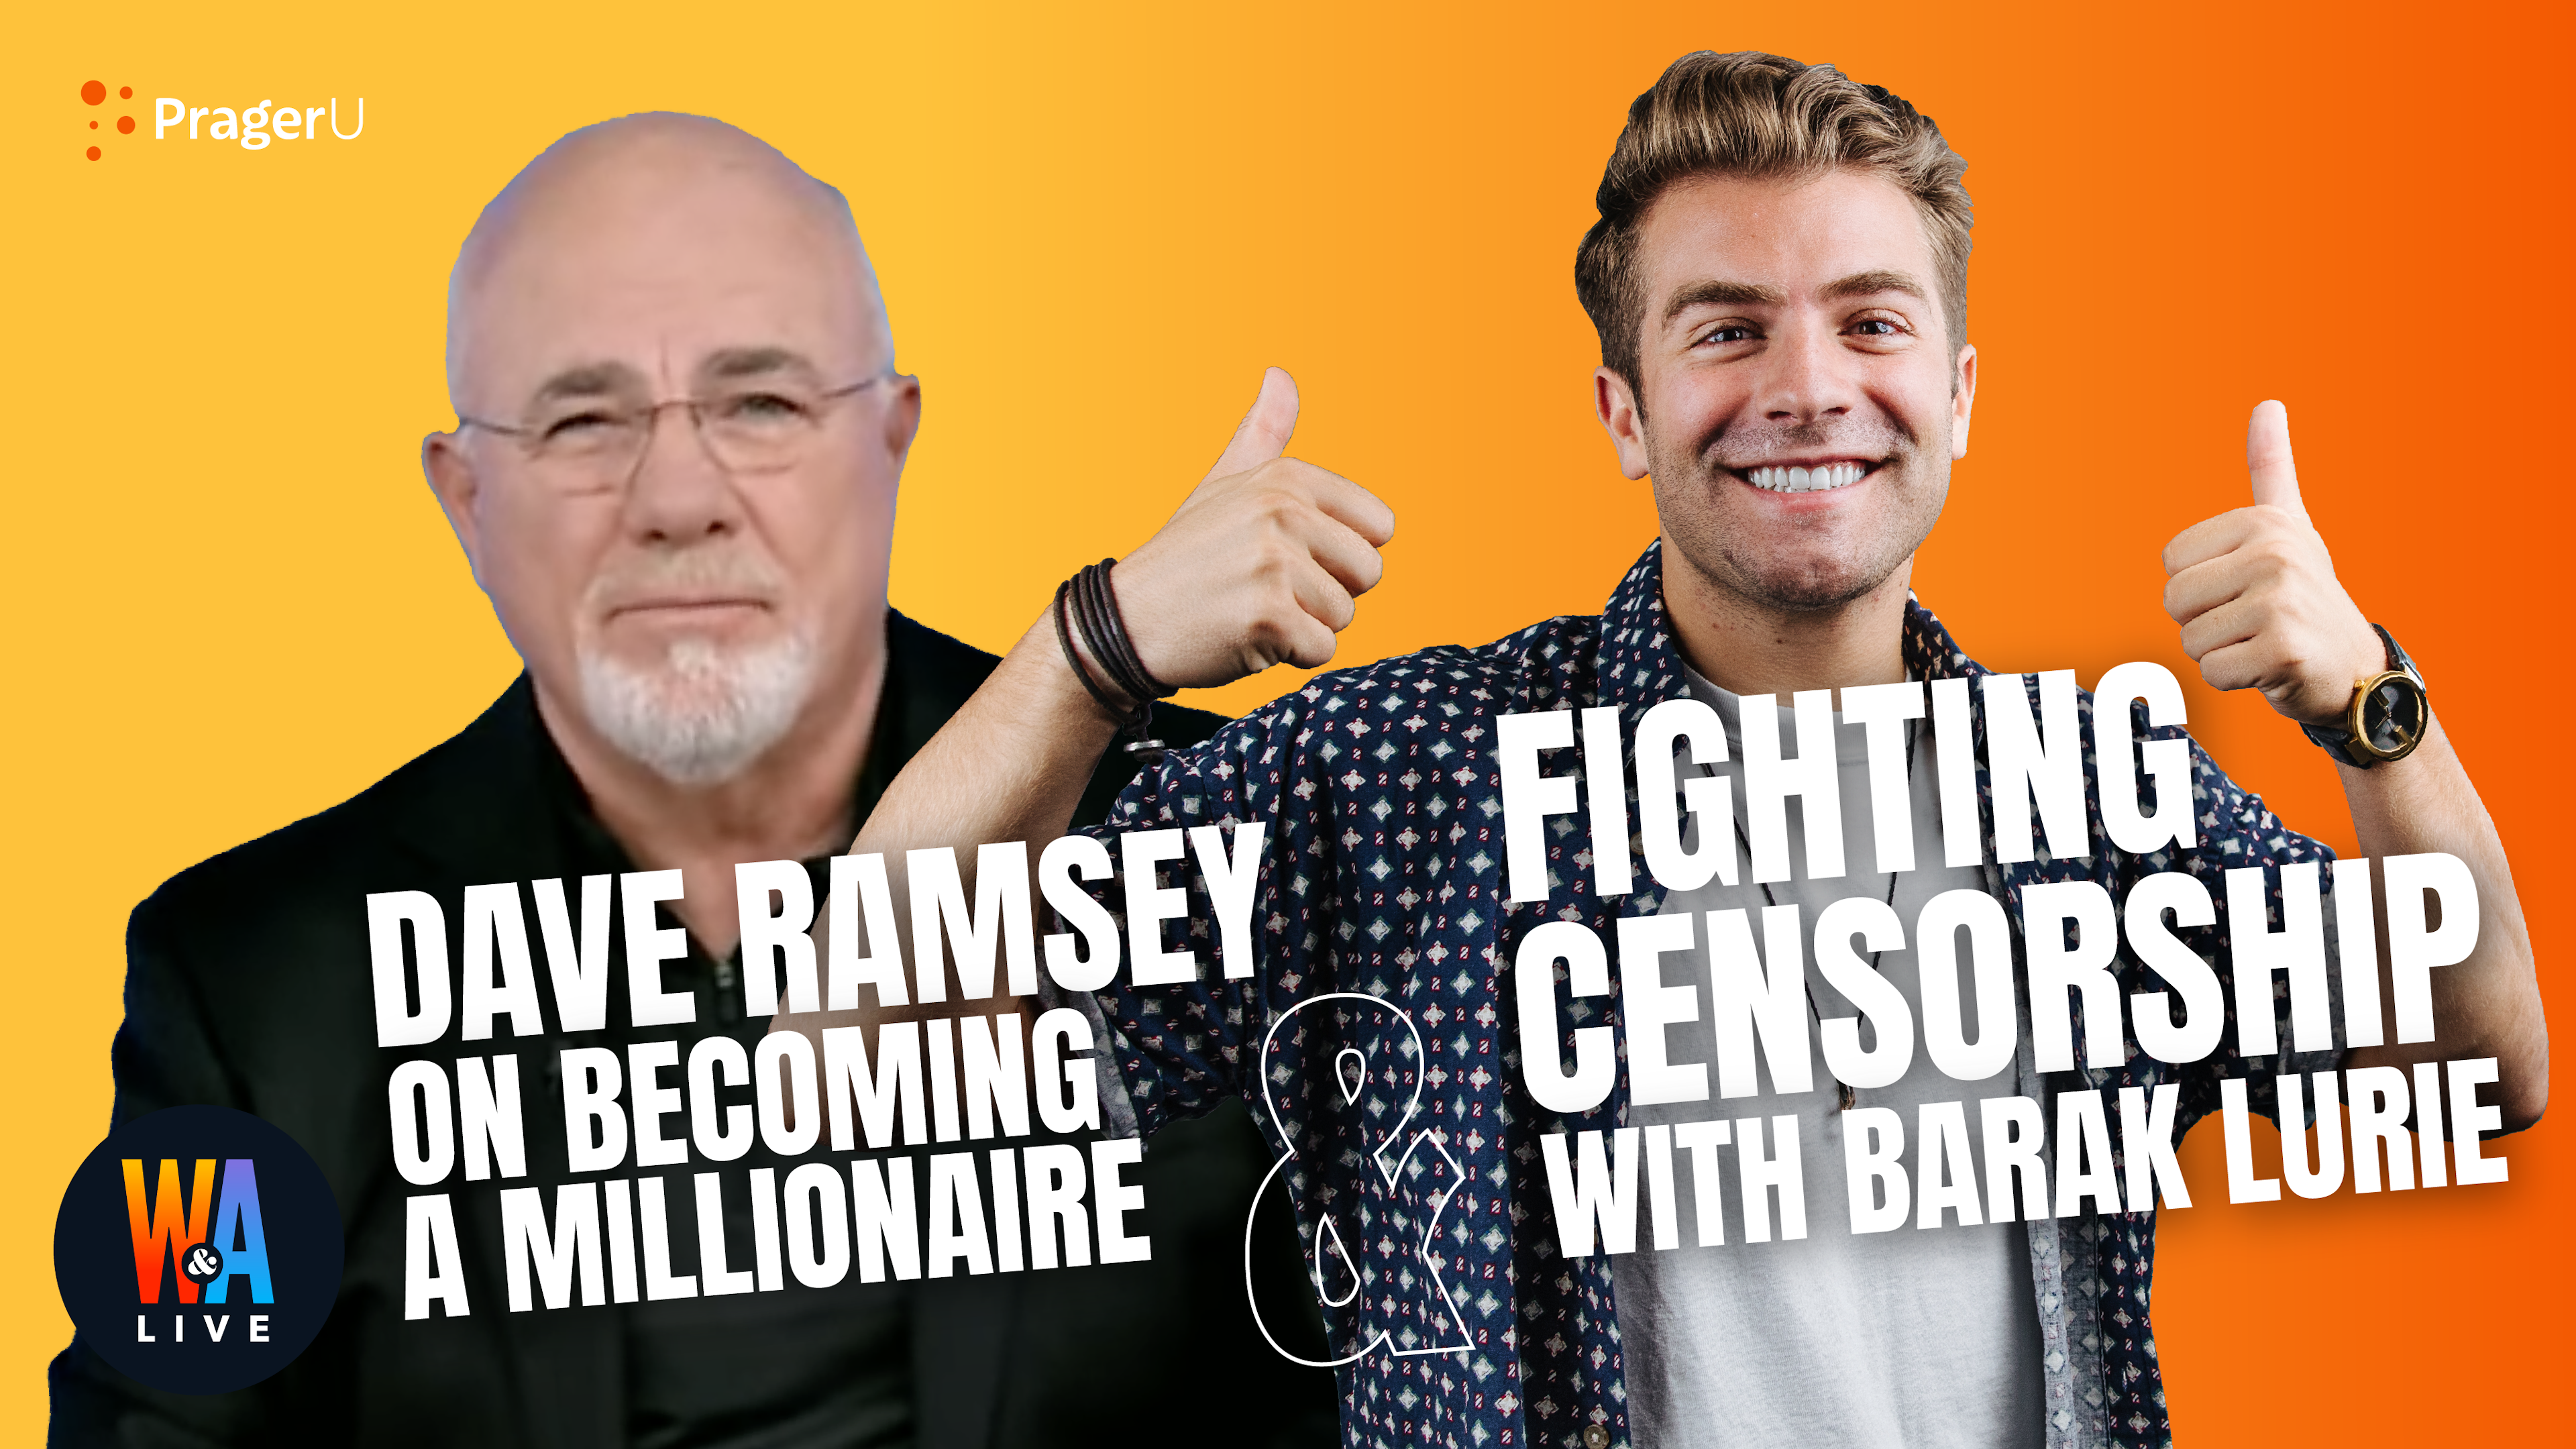 Dave Ramsey on Becoming a Millionaire & Fighting Censorship with Barak Lurie: 1/13/2022